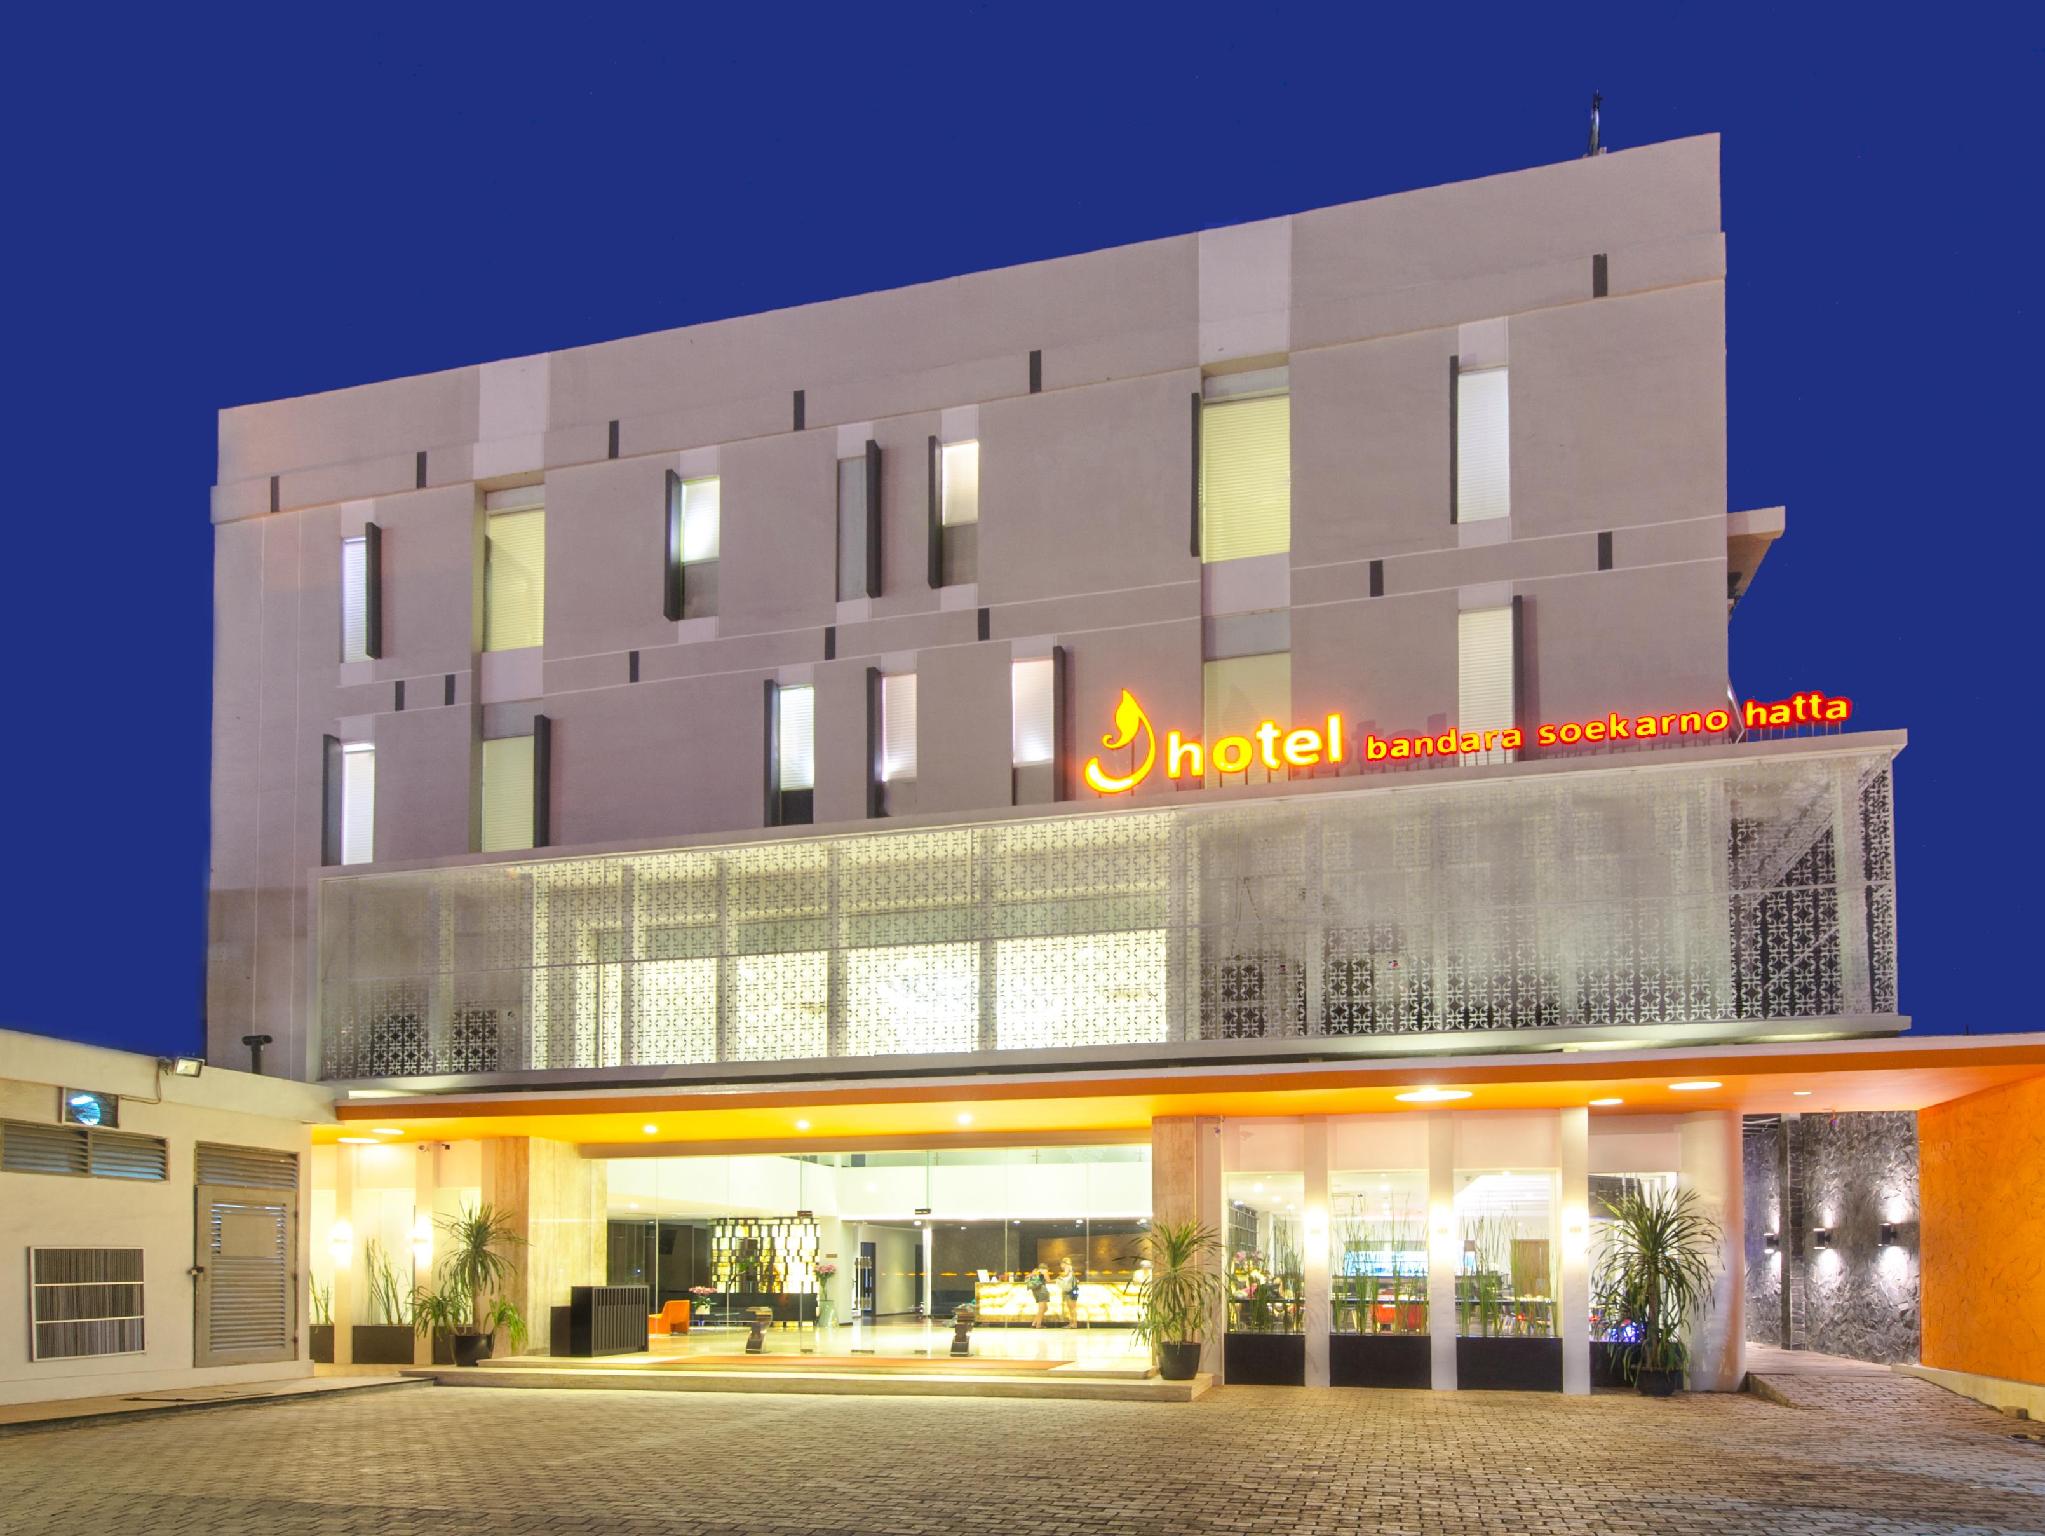 J Hotel Jakarta  Indonesia  Great discounted rates 